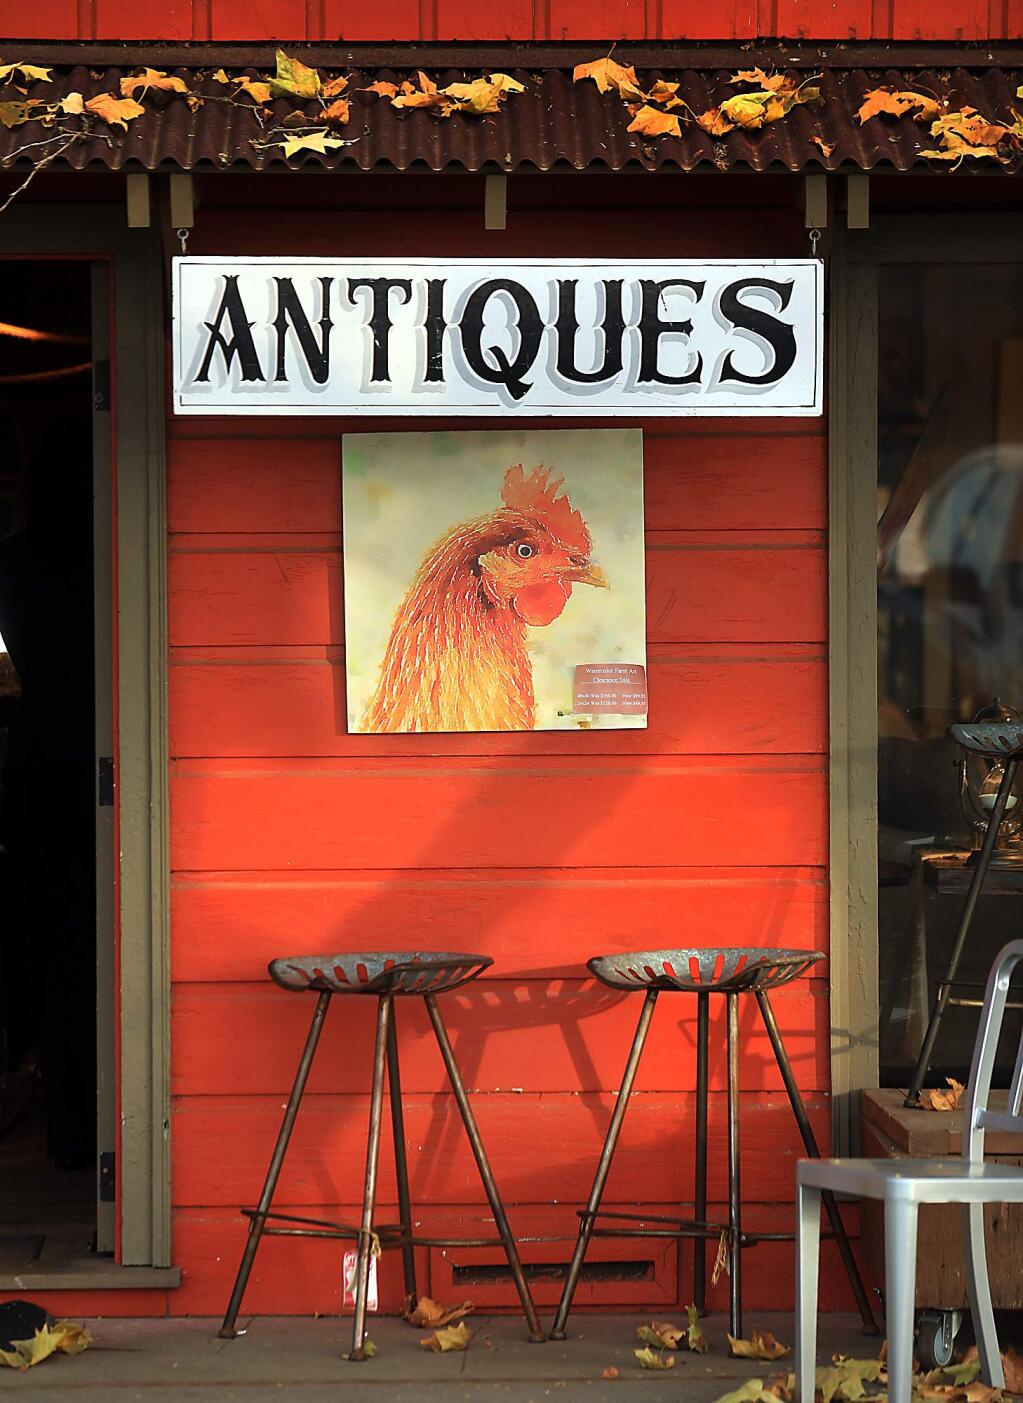 Fat Pilgrim, a menagerie of antiques and locally sourced furniture and other goods in Sonoma, Wednesday Dec. 2, 2015. (Kent Porter / Press Democrat ) 2015